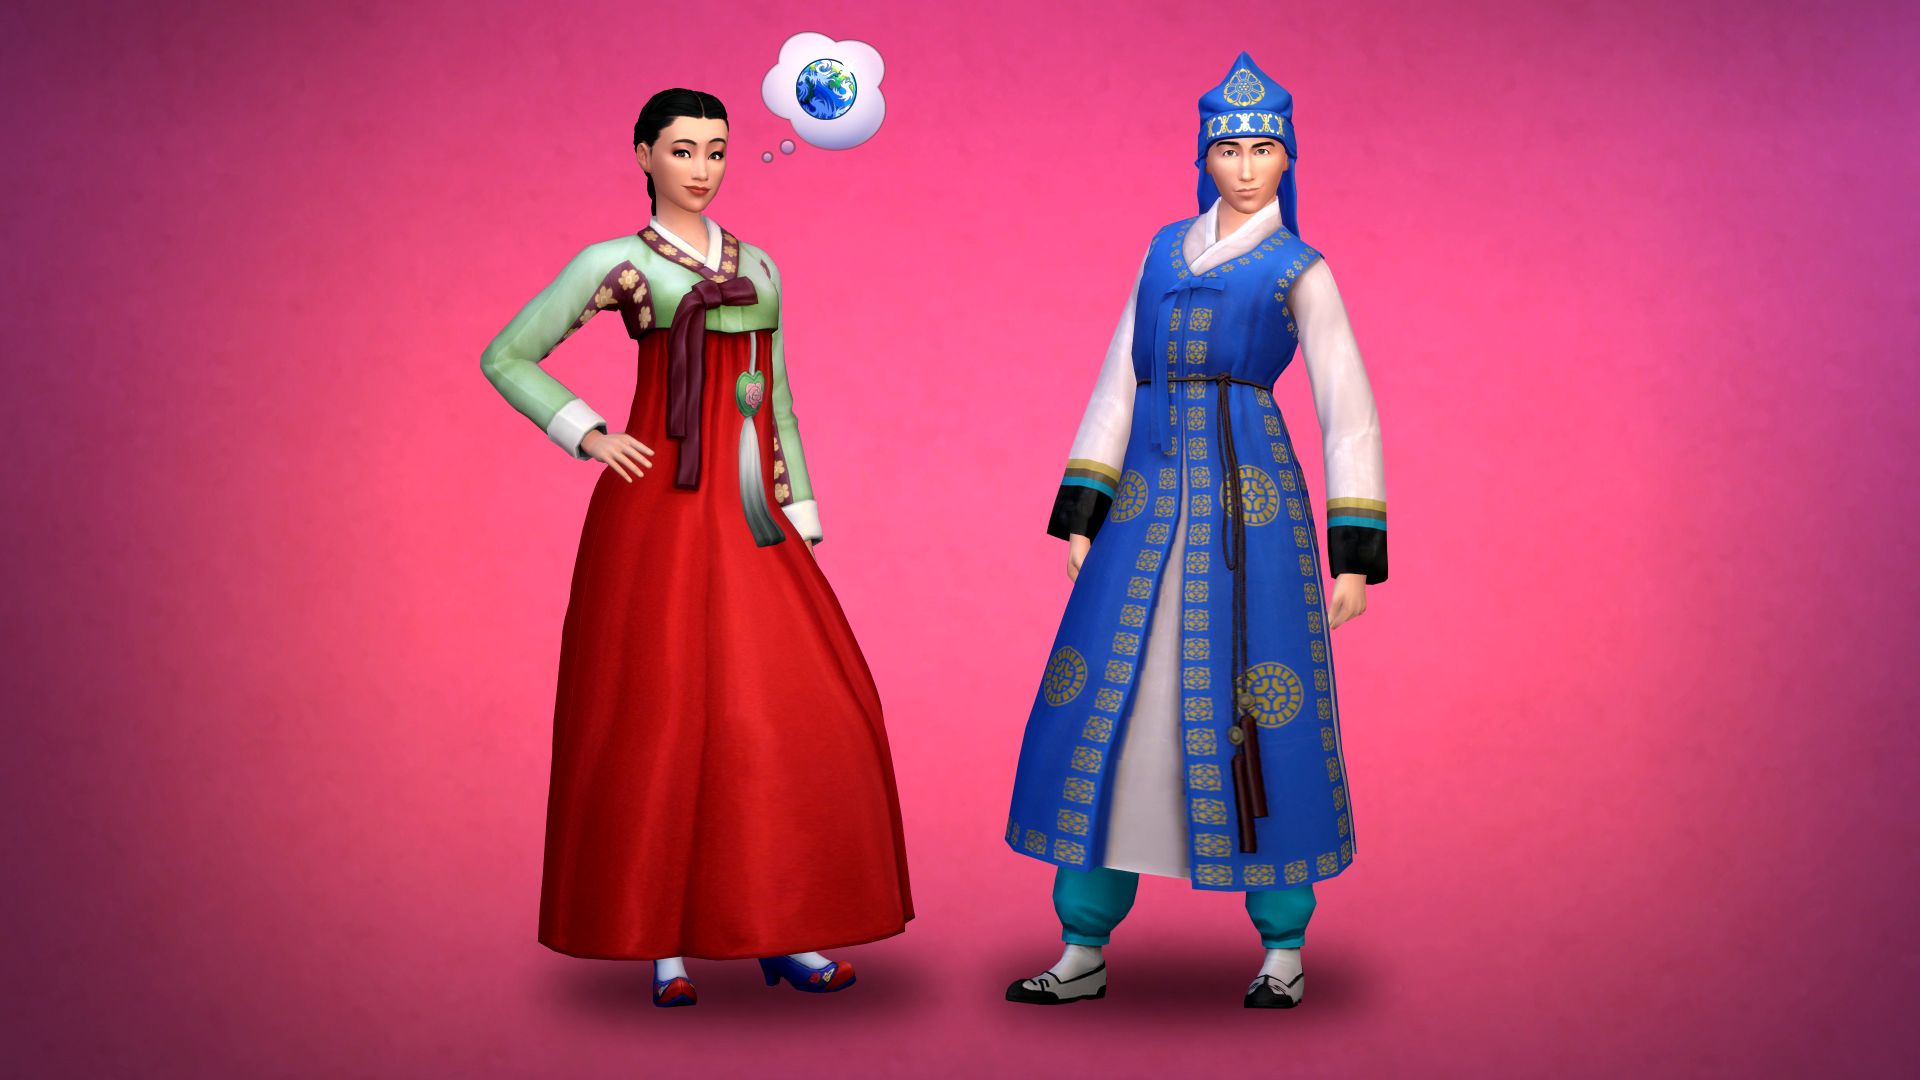 The Sims 4 gets a wee little update with some free cosmetics